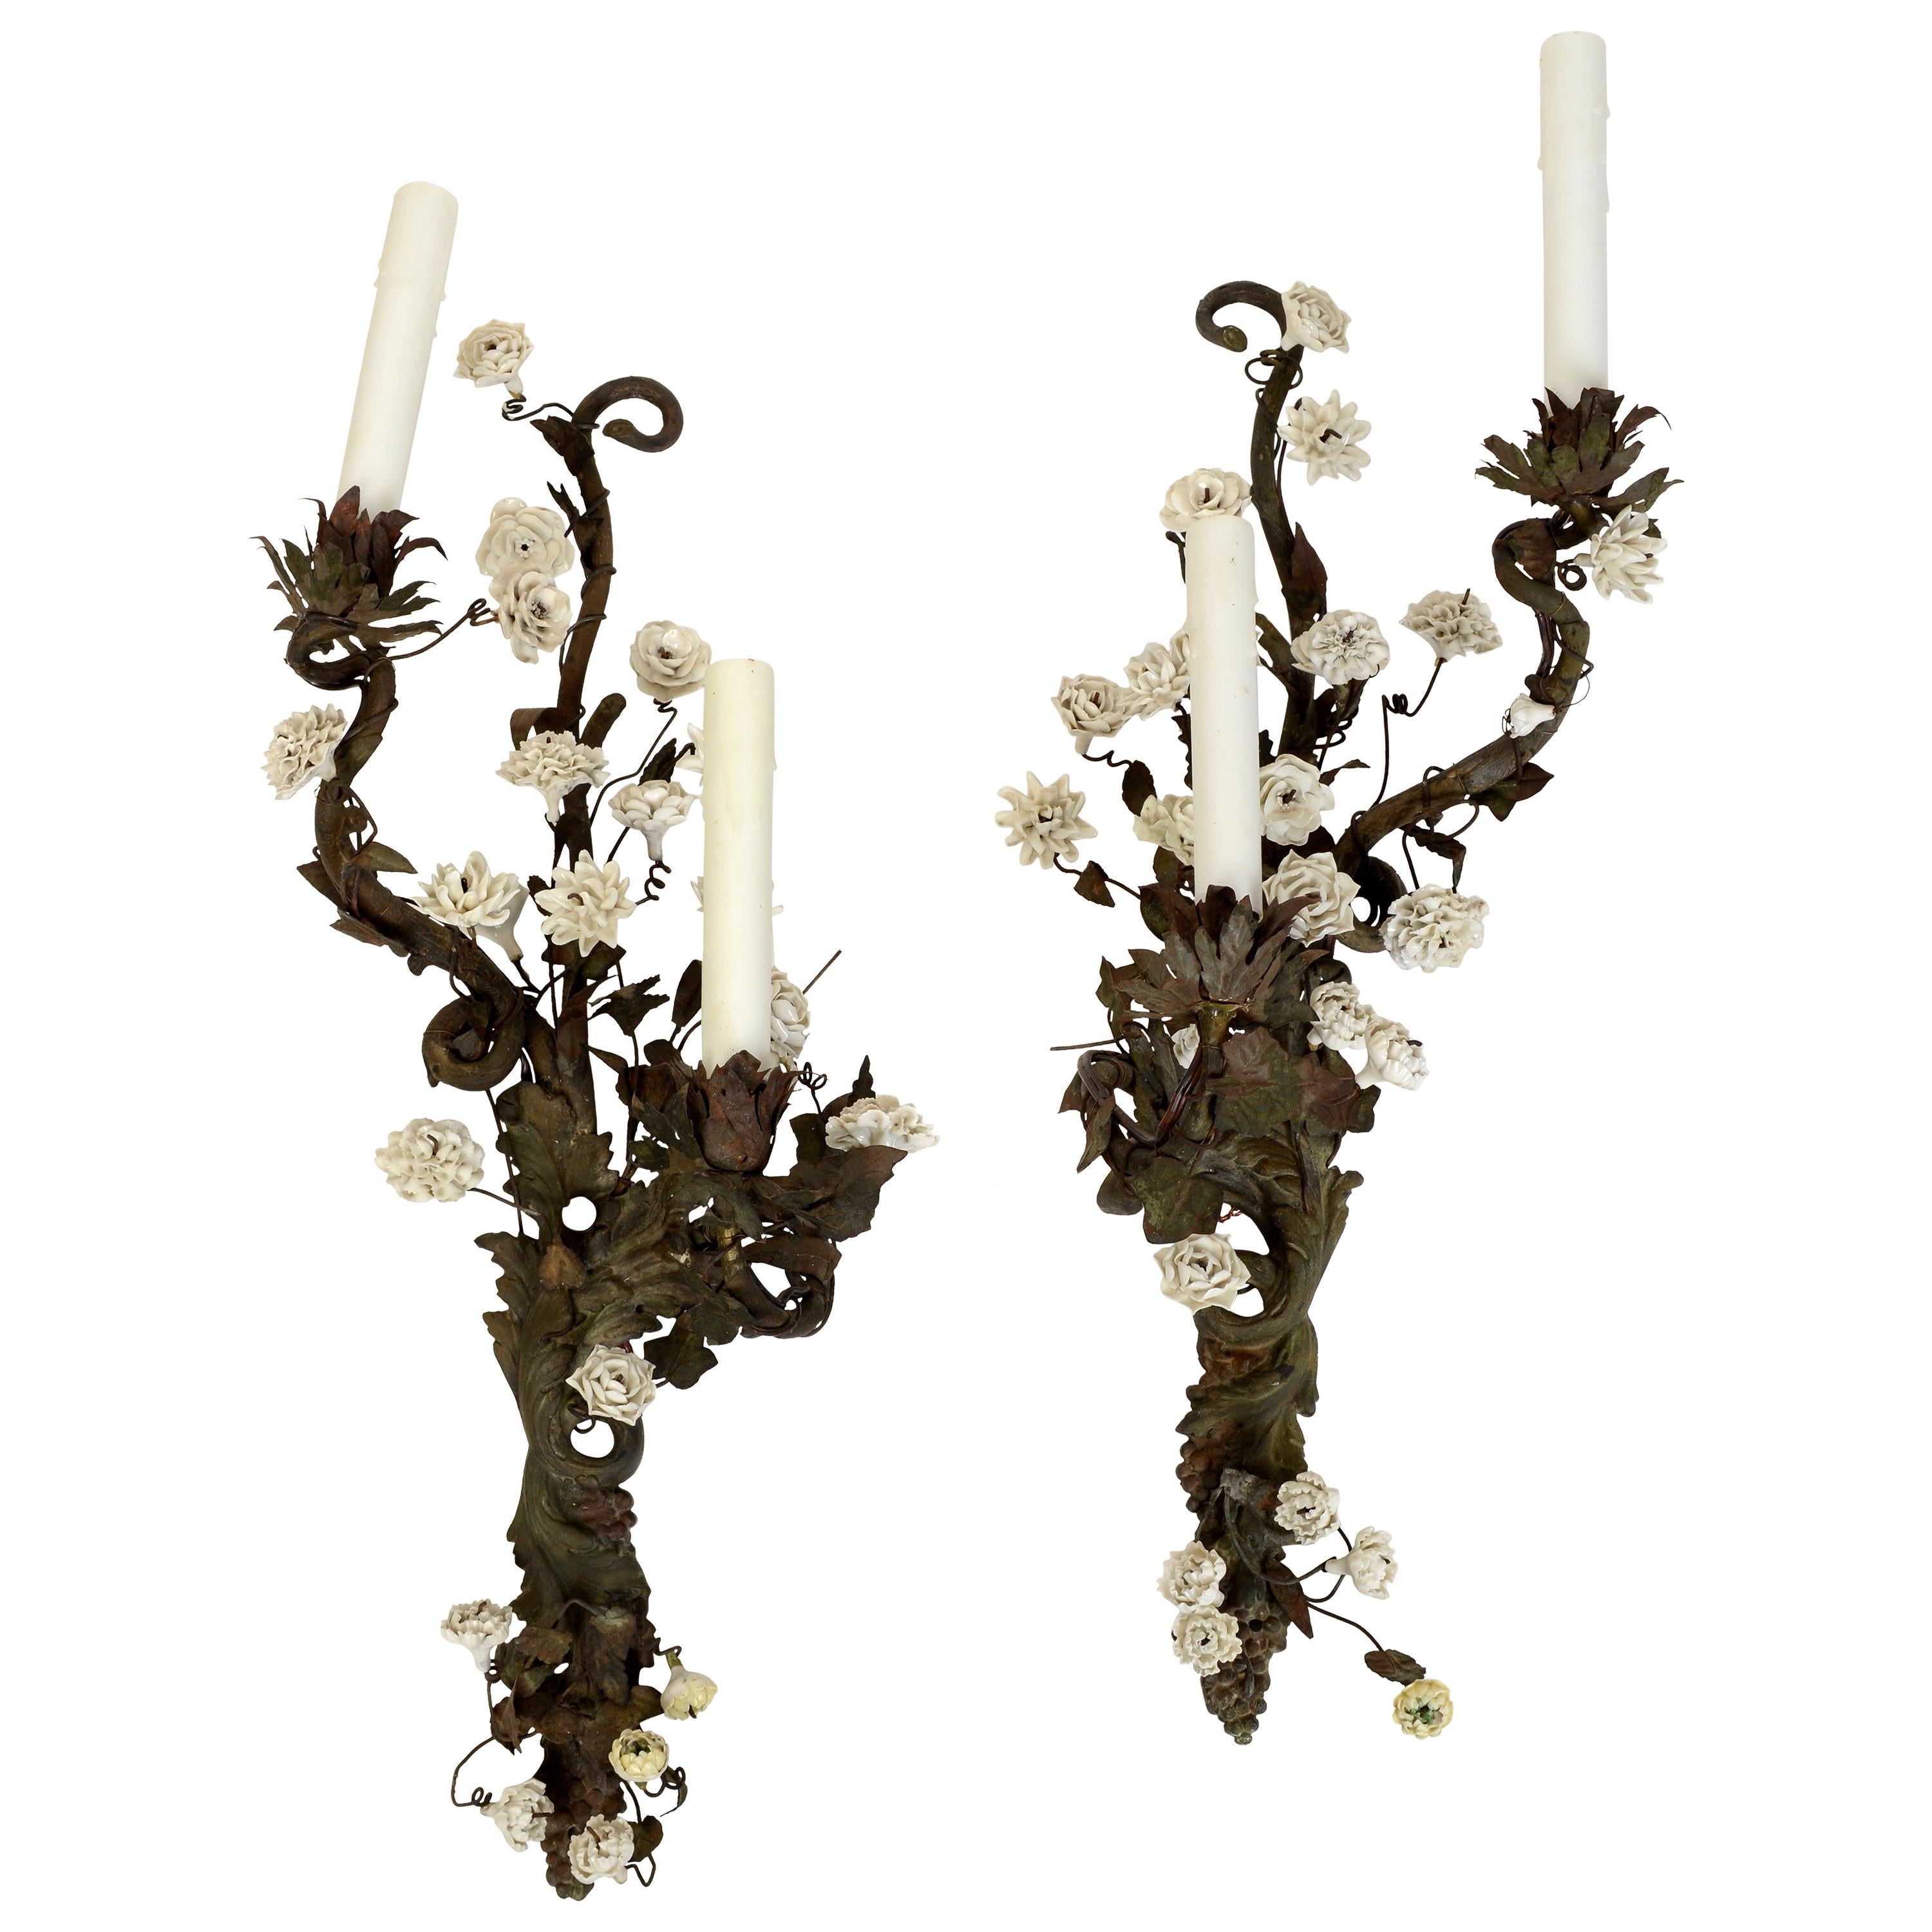 Unusual Pair of French Tole and Iron Sconces with White Porcelain Flowers